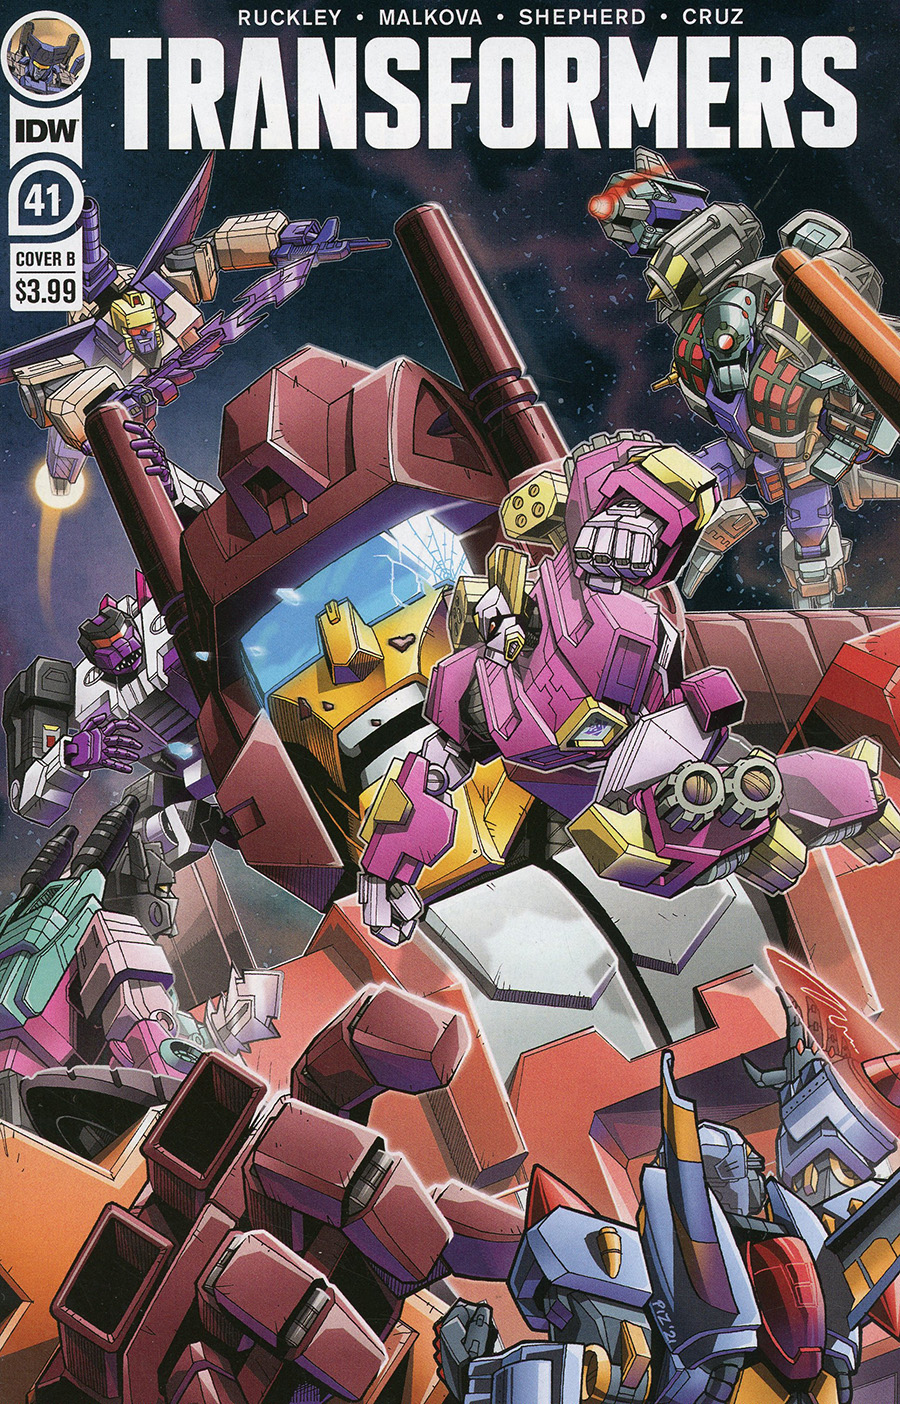 Transformers Vol 4 #41 Cover B Variant Ed Pirrie Cover